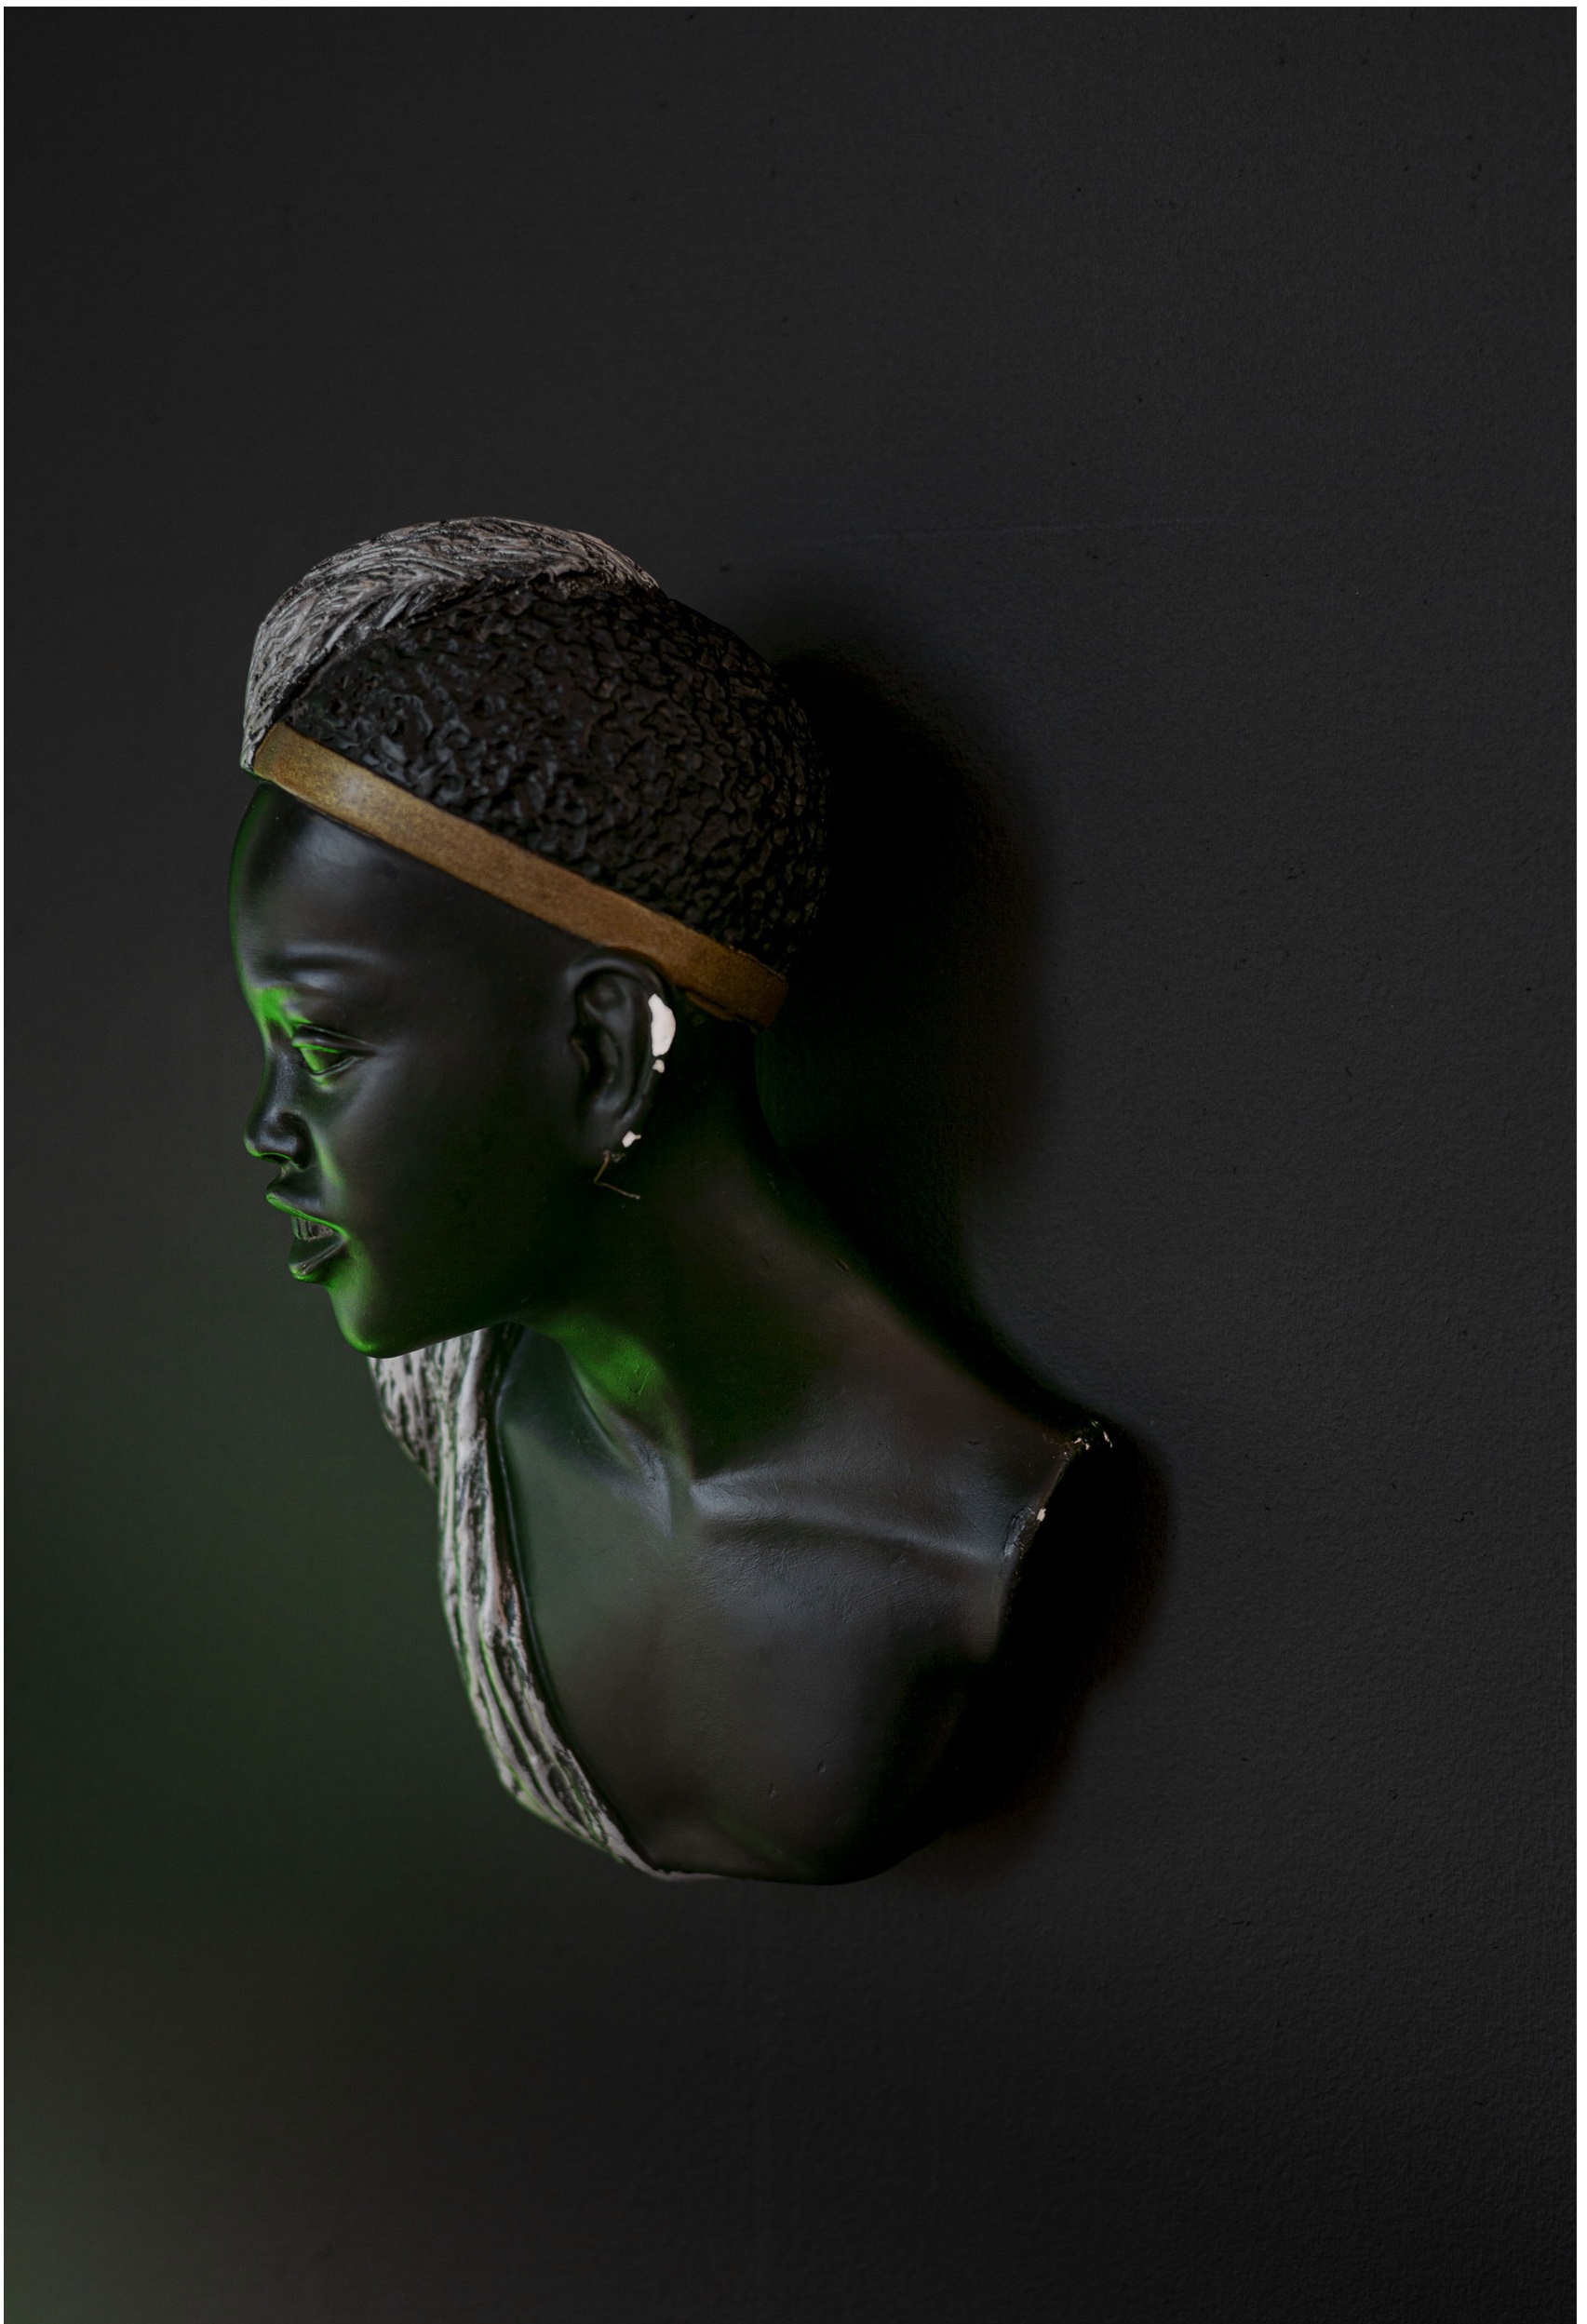 DAVID ADIKA
UNTITLED (FIGURINE, 'MIZRACHI', NO. 005 GREEN) FROM “BLACK MARKET” , 2020
Color photography, inkjet print in varying dimensions
61 x 89 cm. (24.02 x 35.04 in.)
Edition 1 of 3, with 2 APs